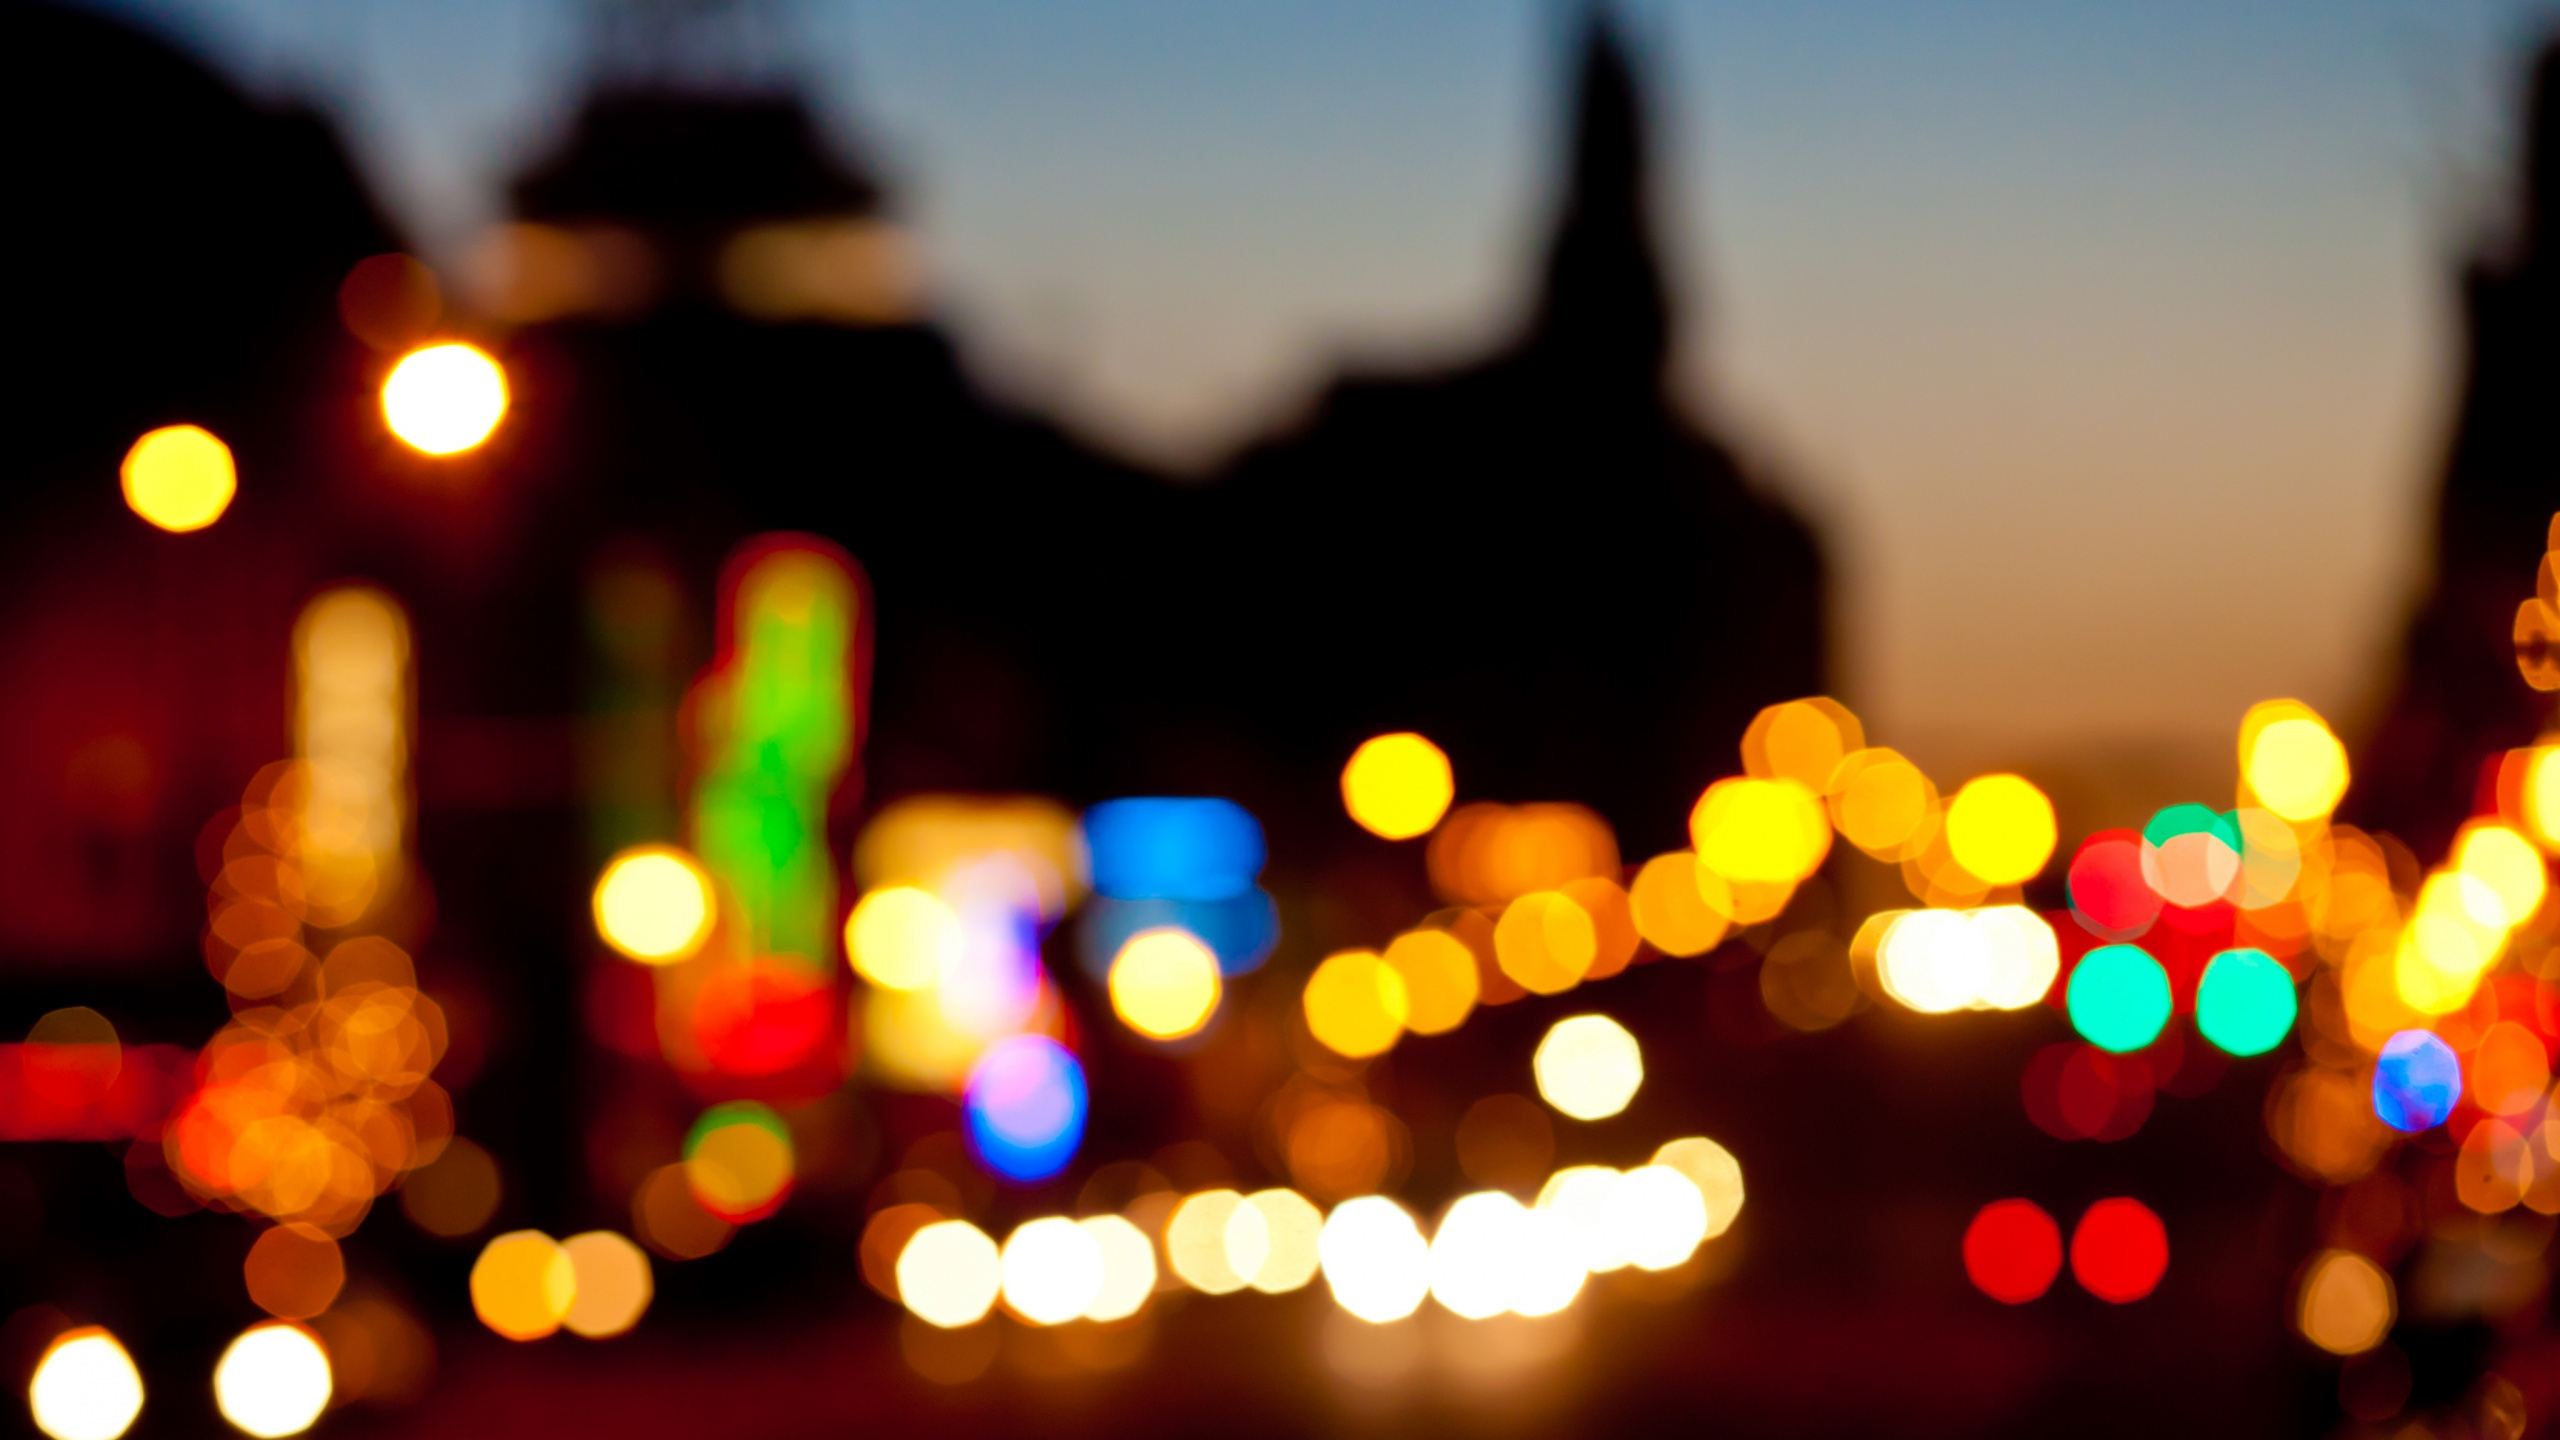 Bokeh Photography of City Lights During Night Time. Wallpaper in 2560x1440 Resolution